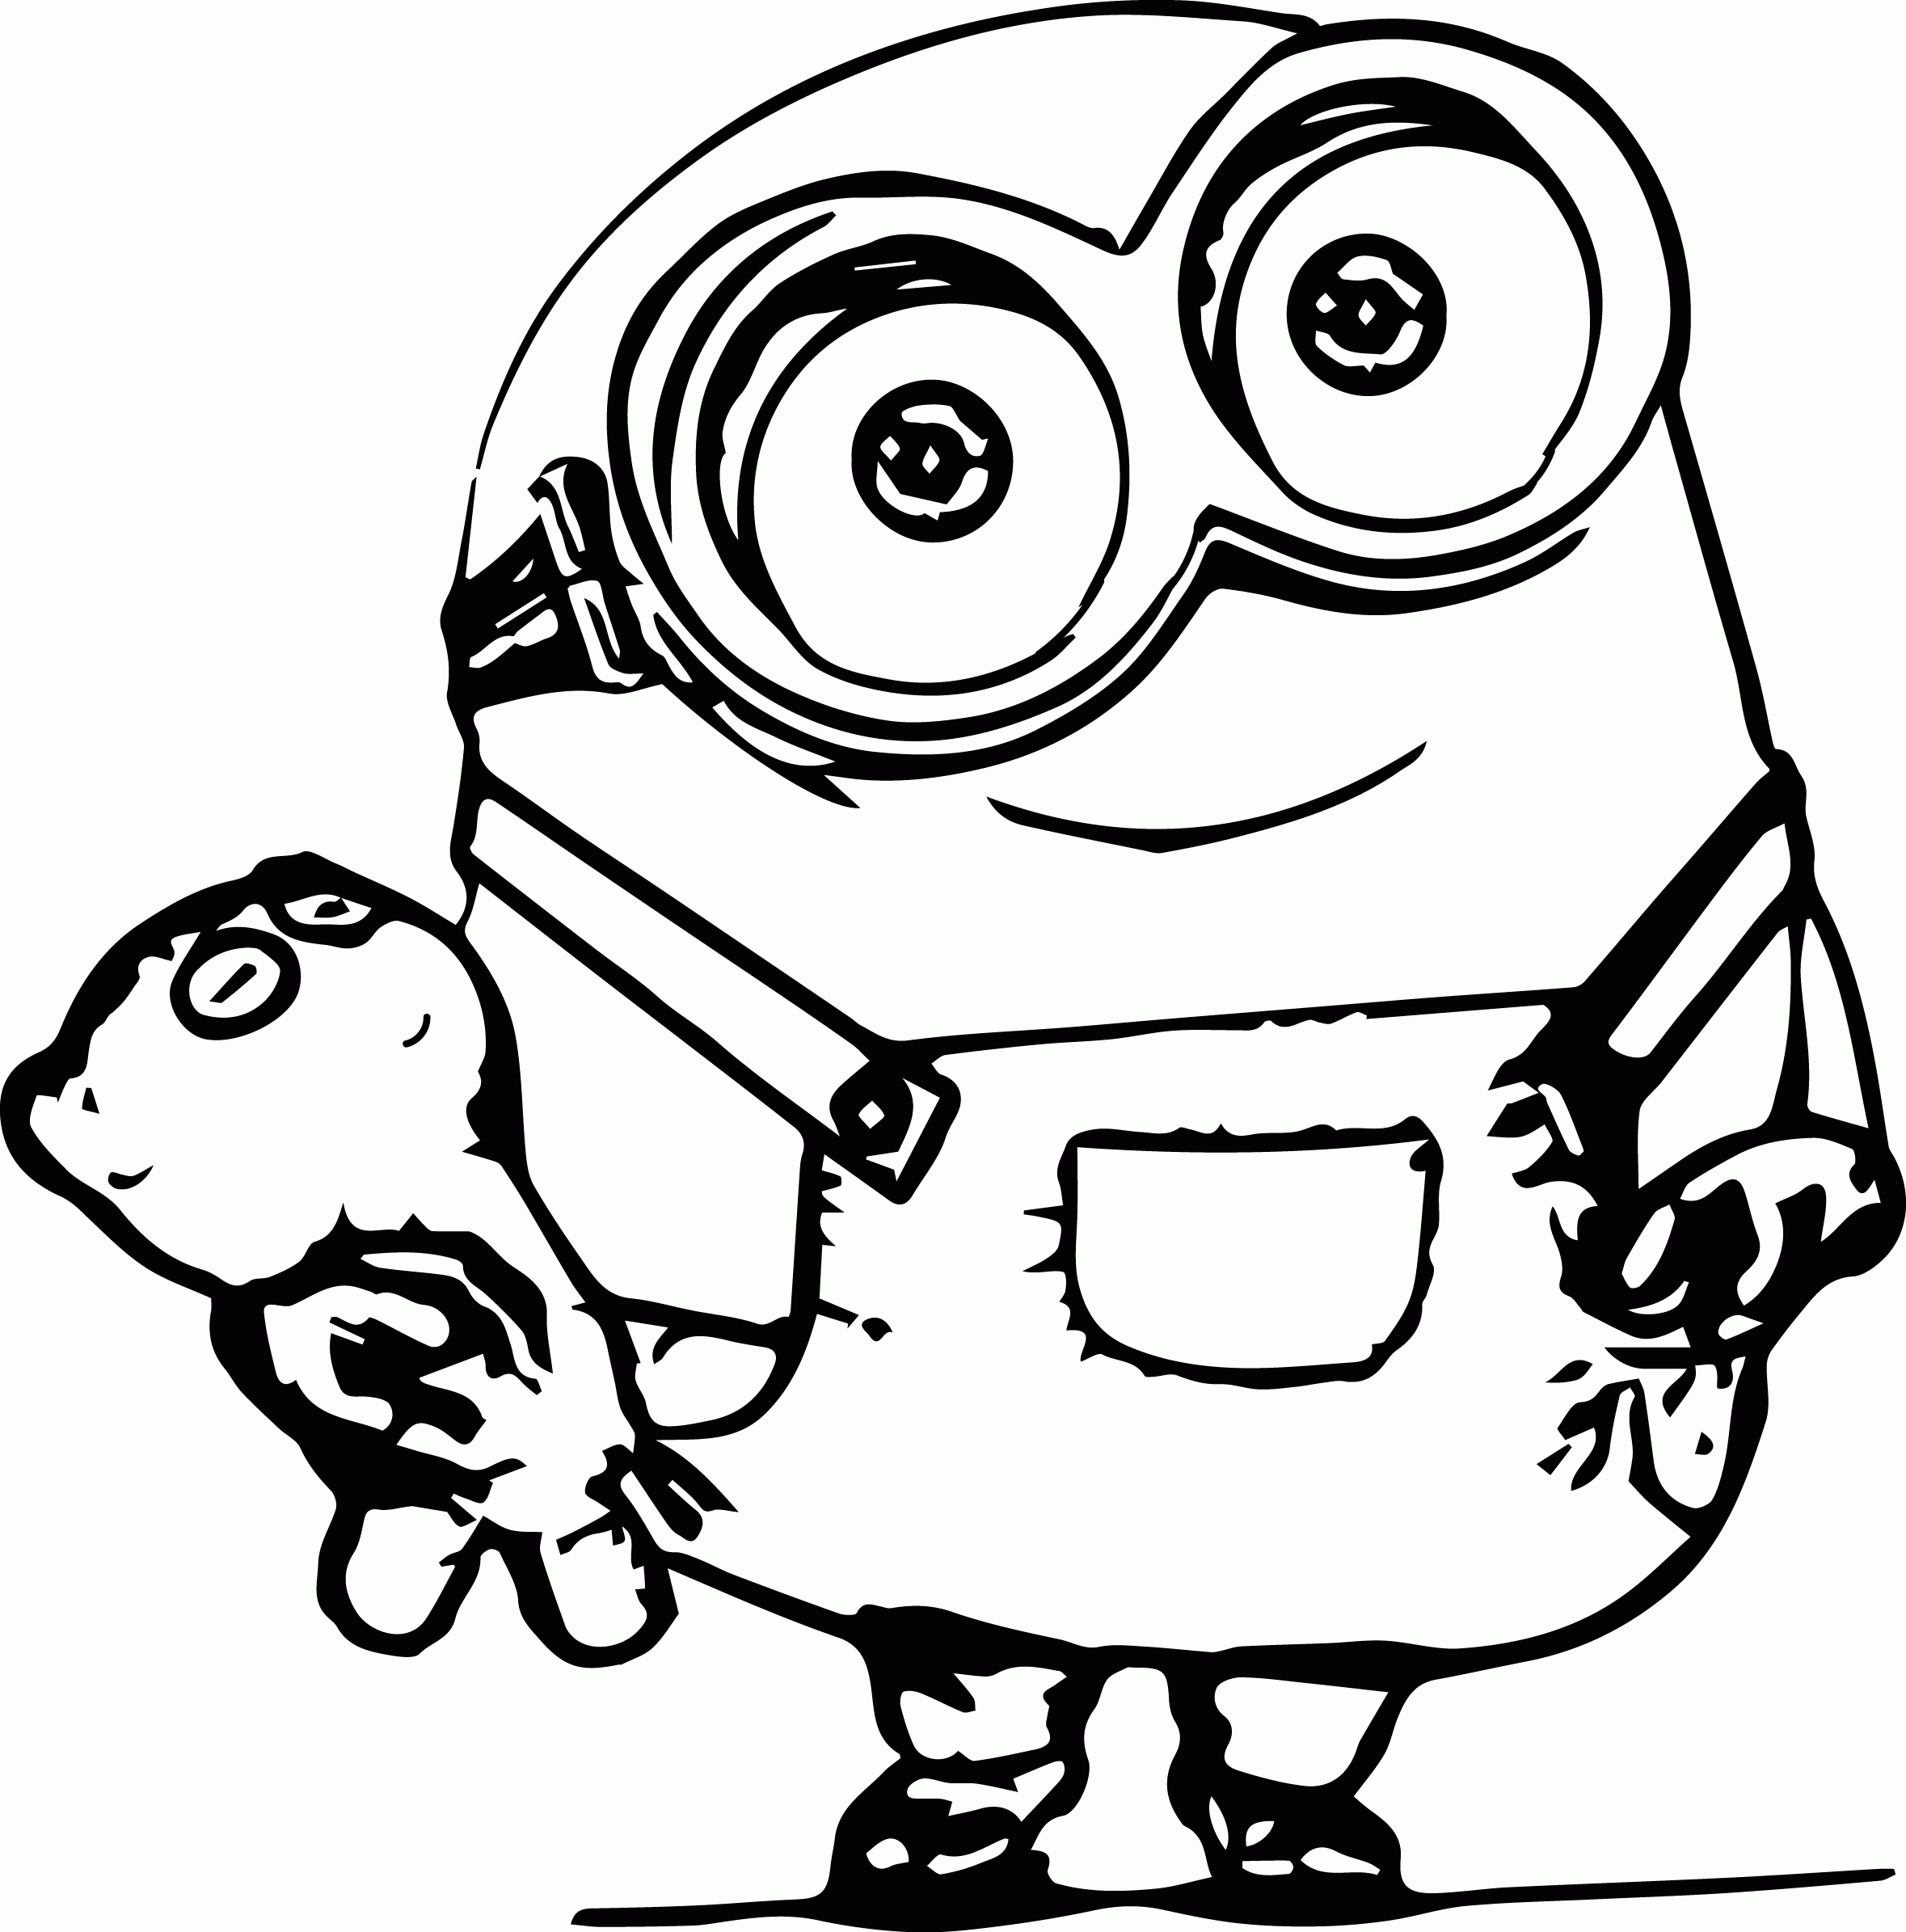 Minions Coloring Pages | proudvrlistscom